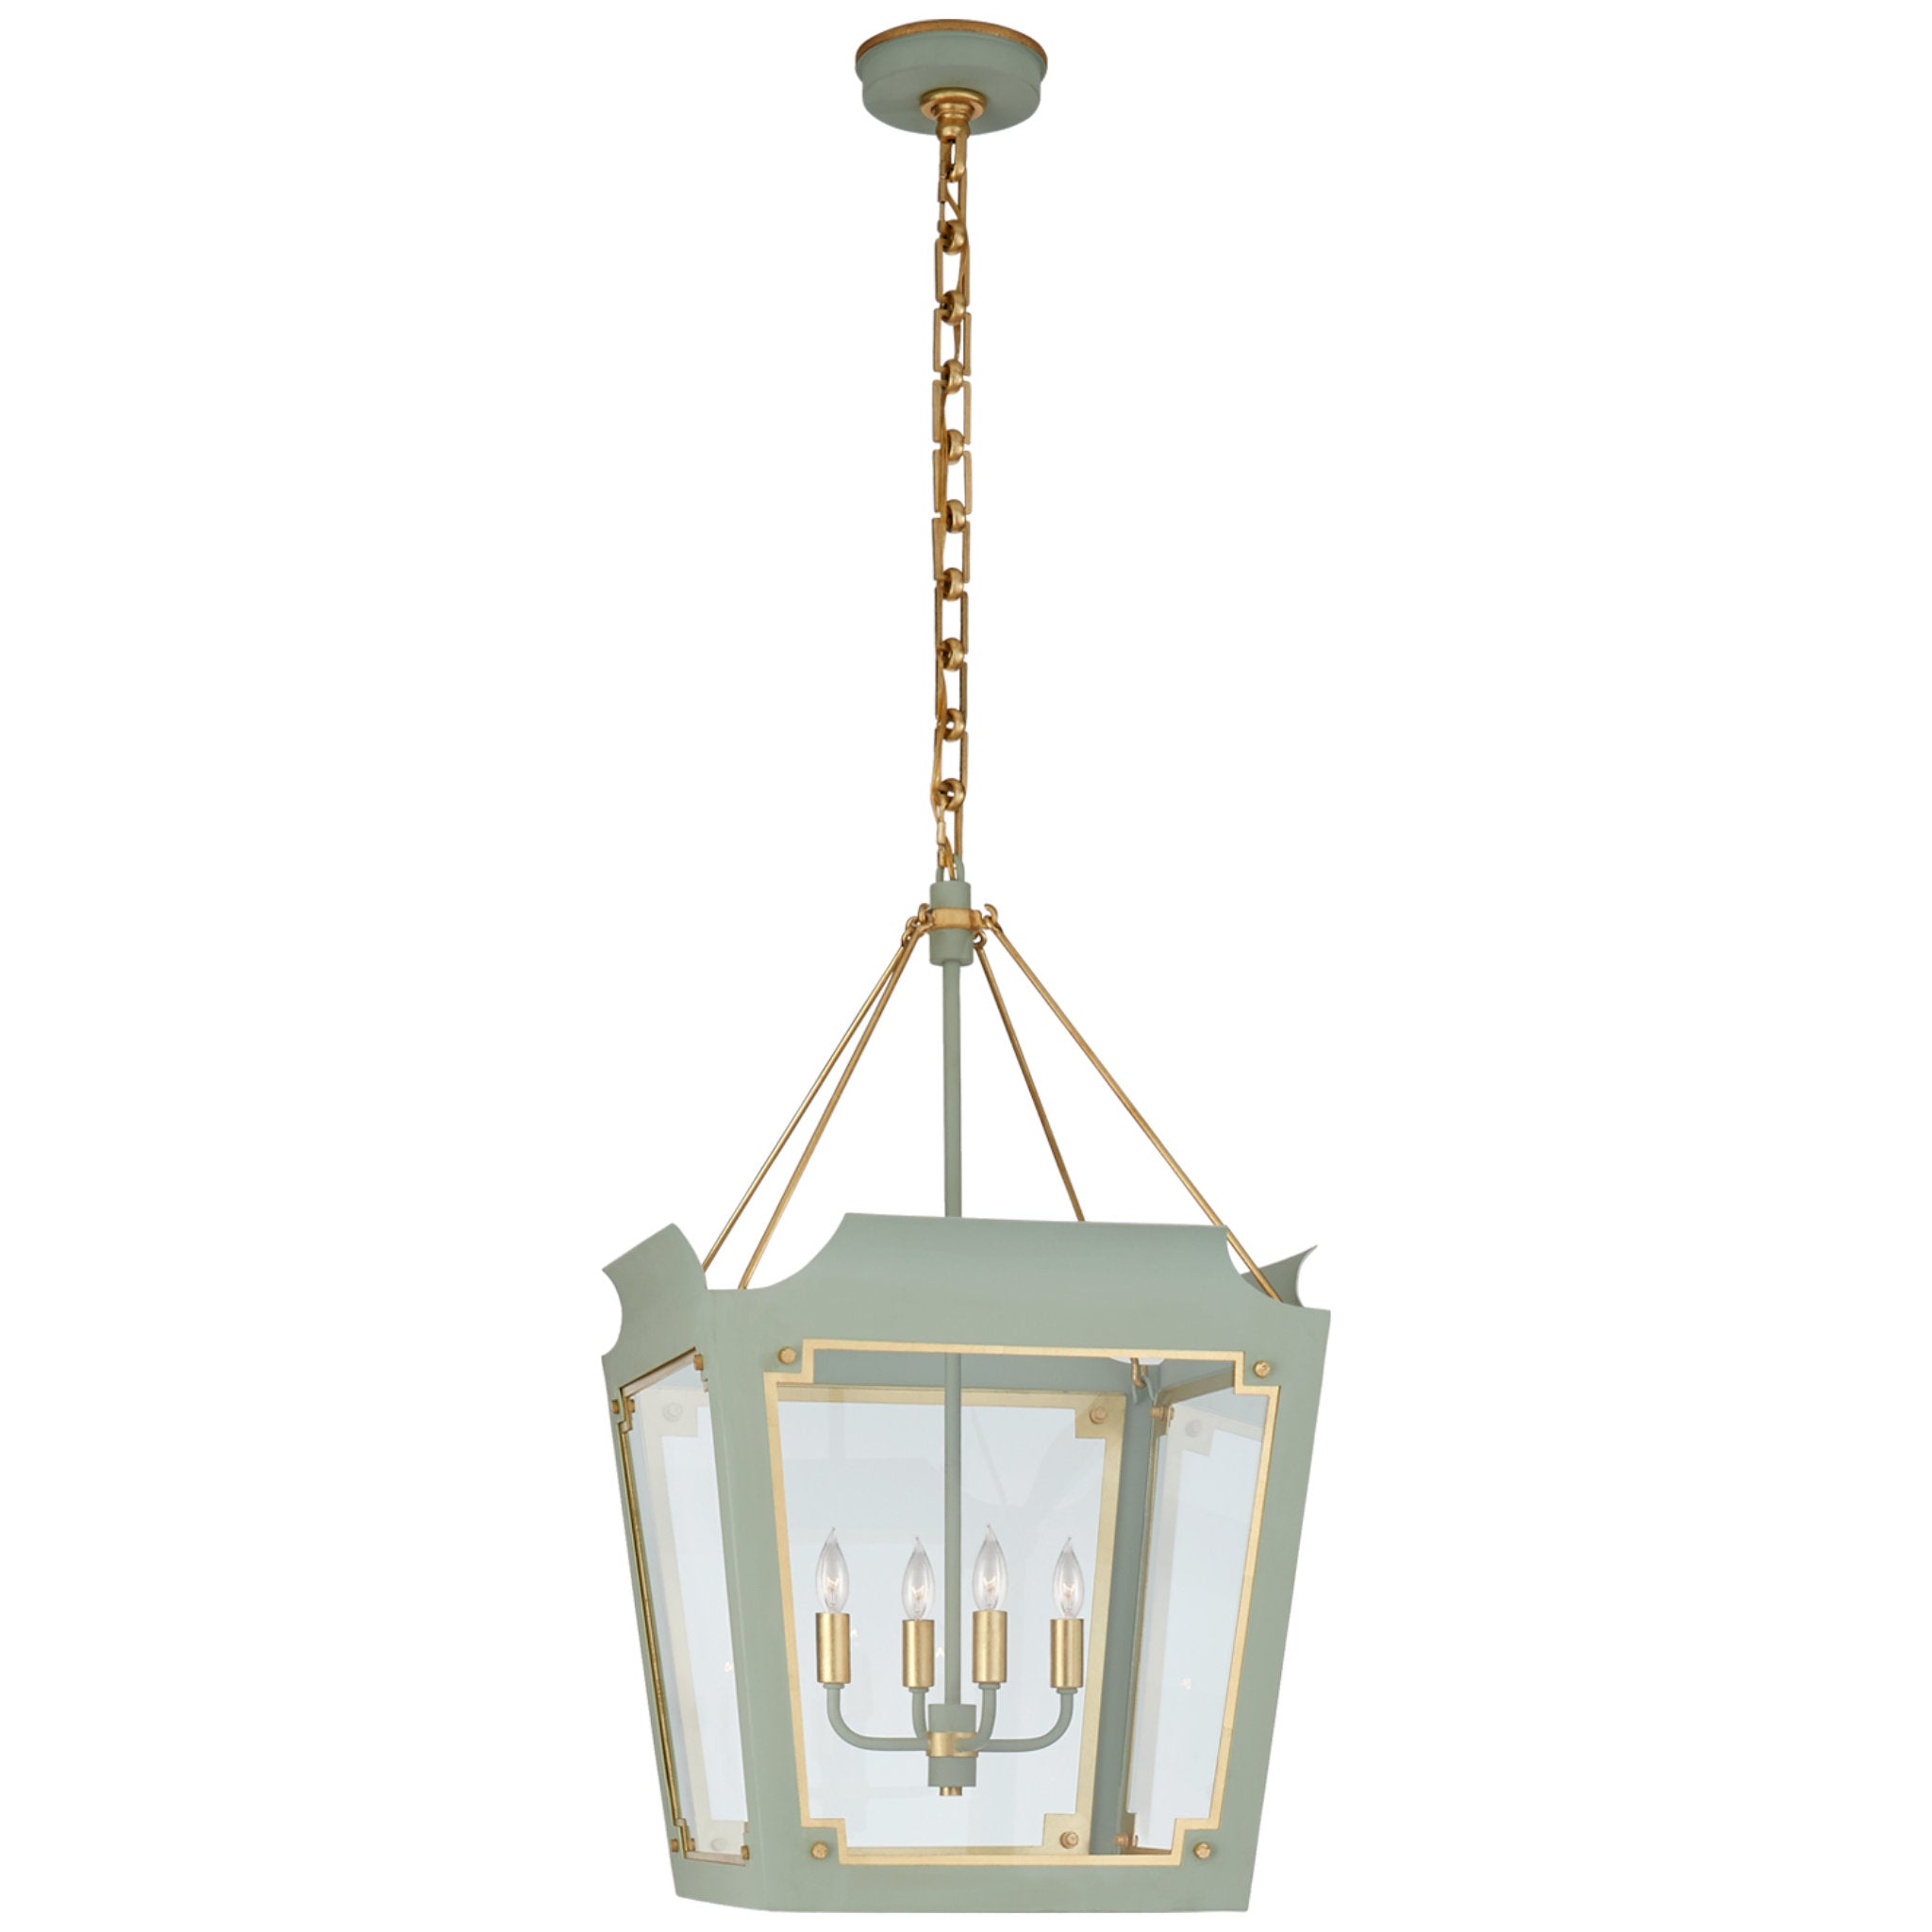 Julie Neill Caddo Medium Lantern in Celadon and Gild with Clear Glass